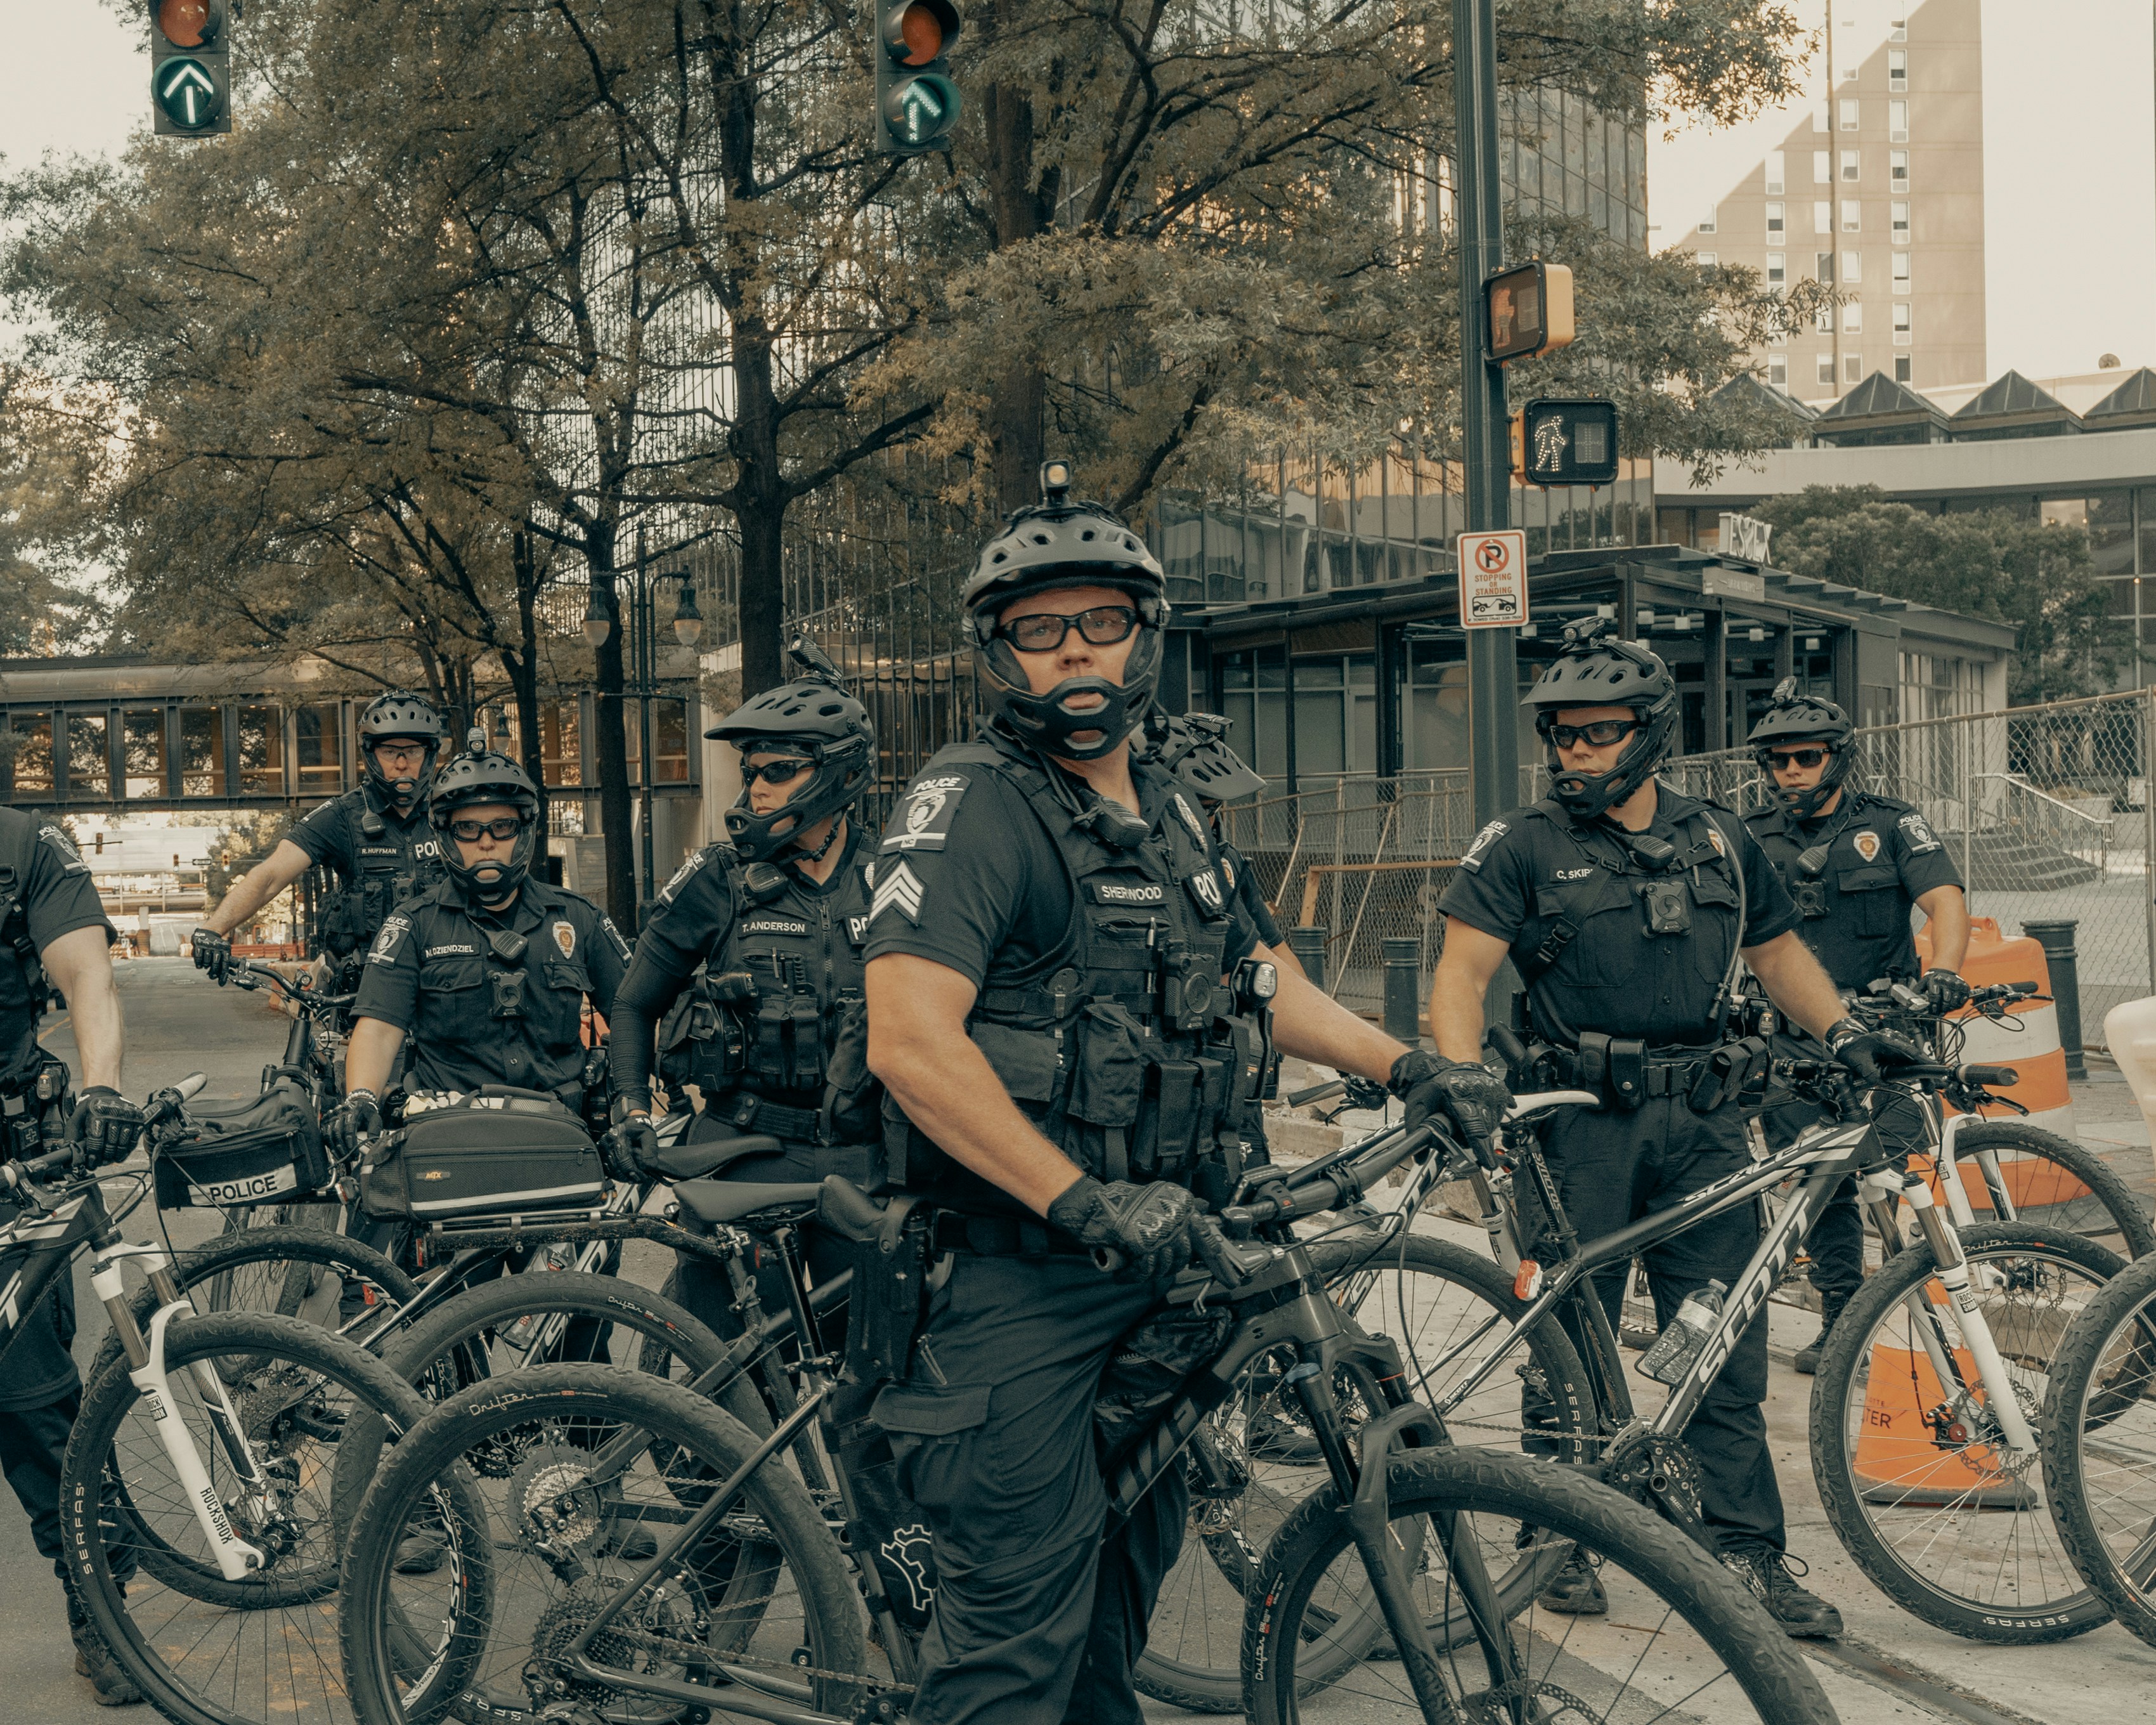 Police Squad at the George Floyd protests in Uptown Charlotte, 5/30/2020 (IG: @clay.banks)